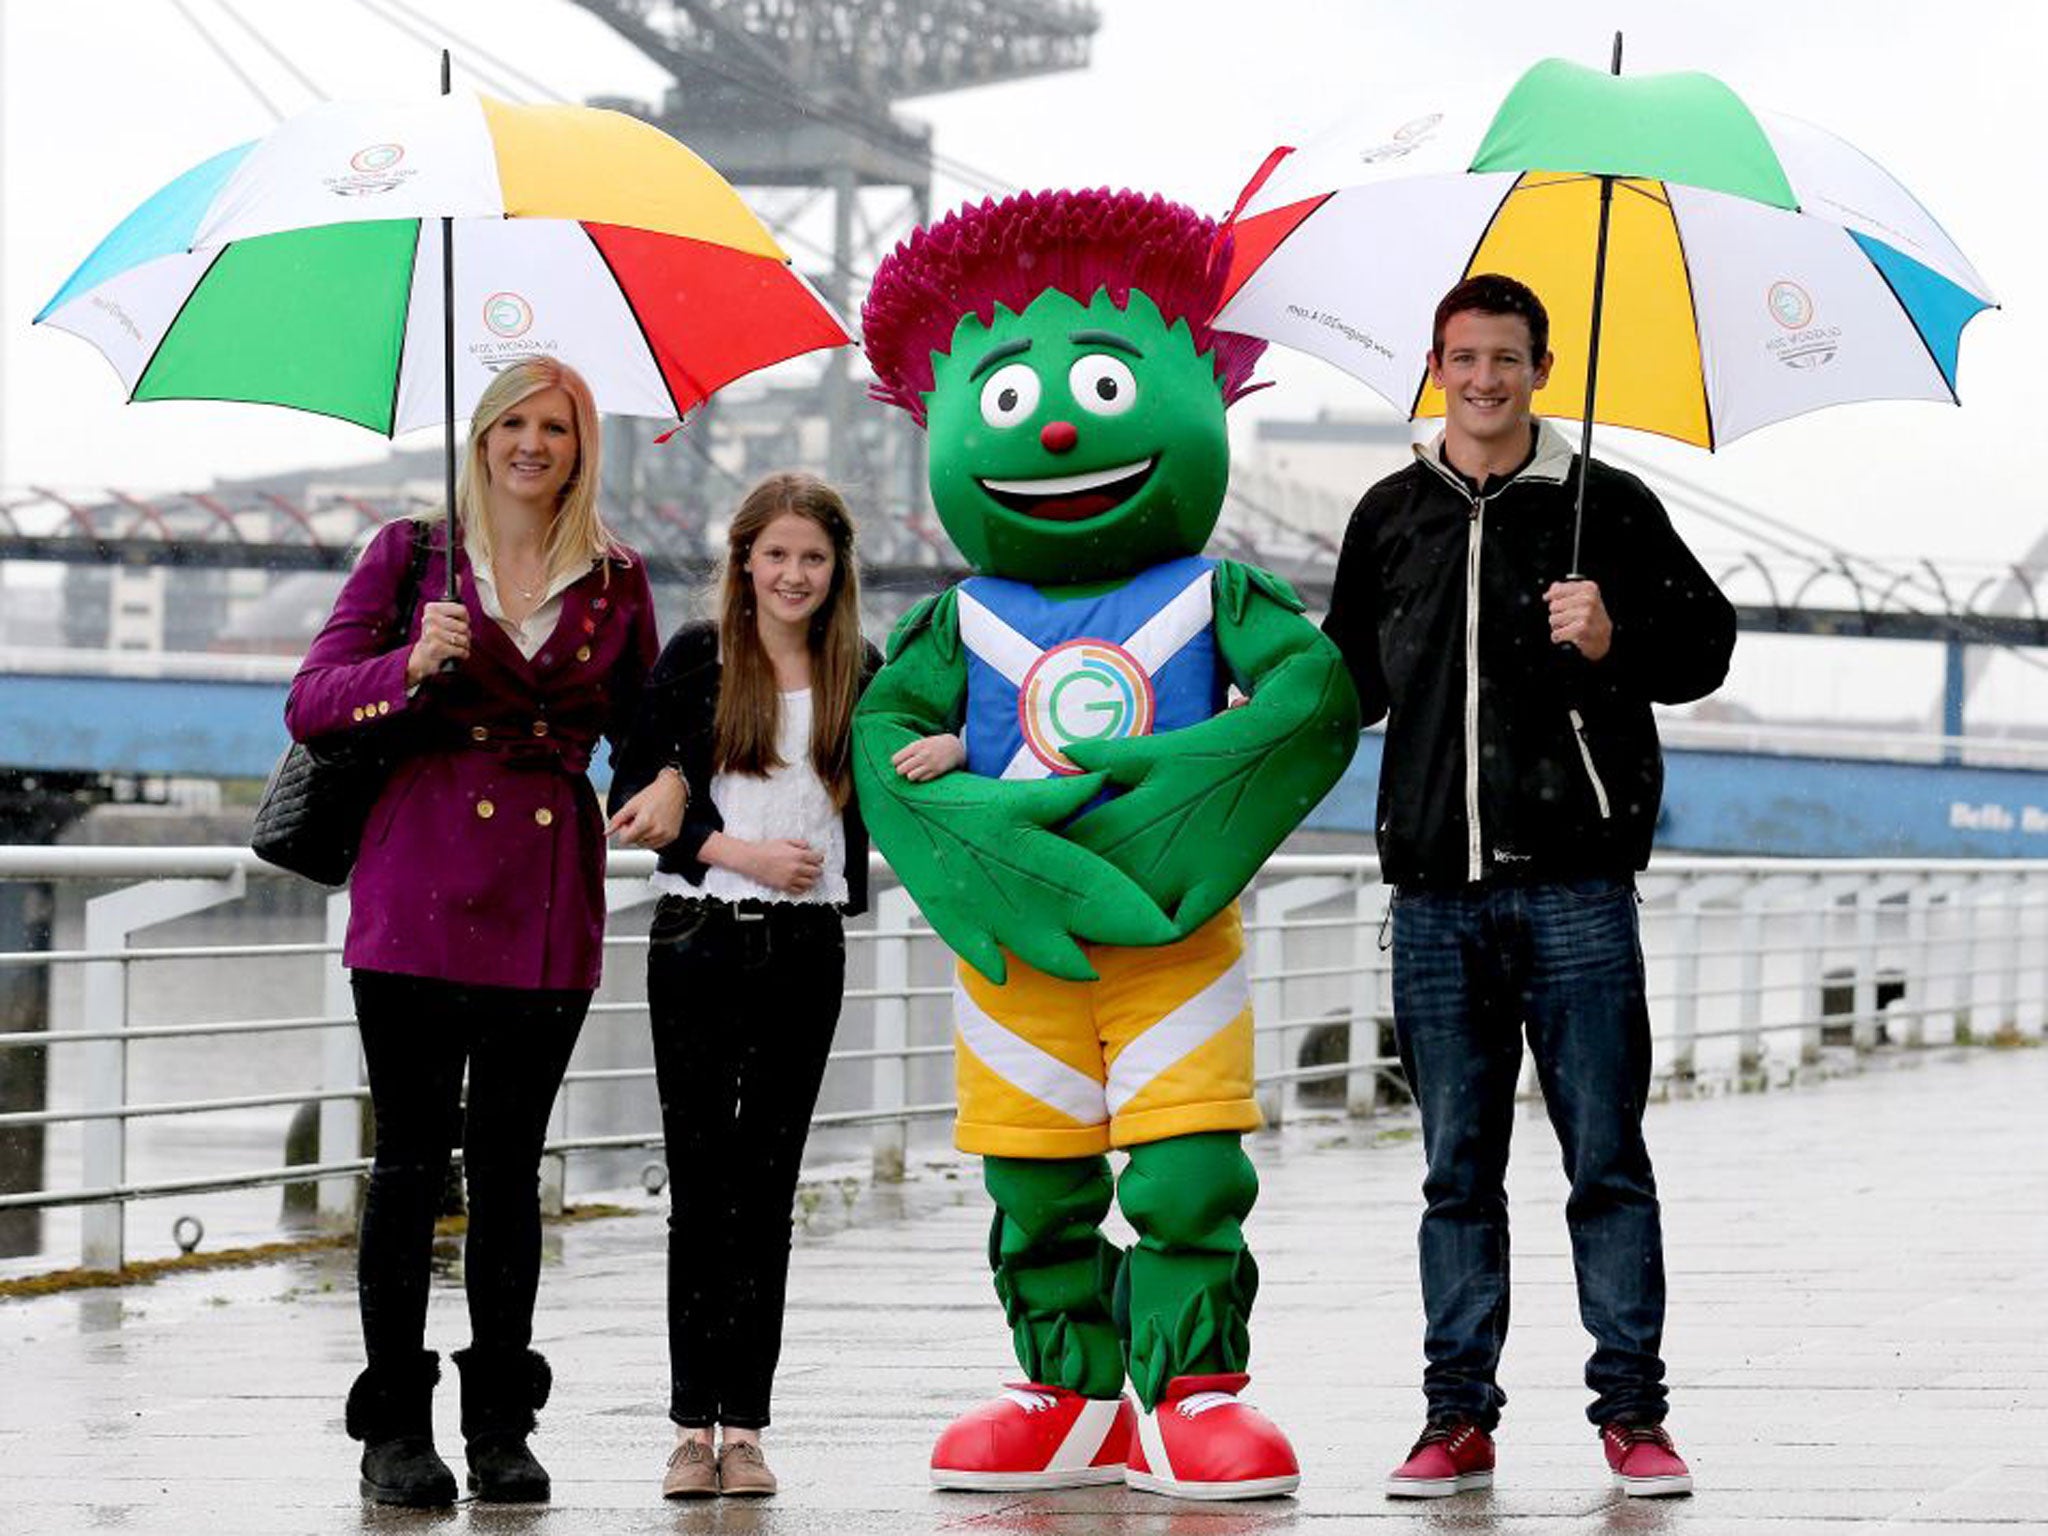 Beth Gilmour, Designer of the Commonwealth Games Mascot